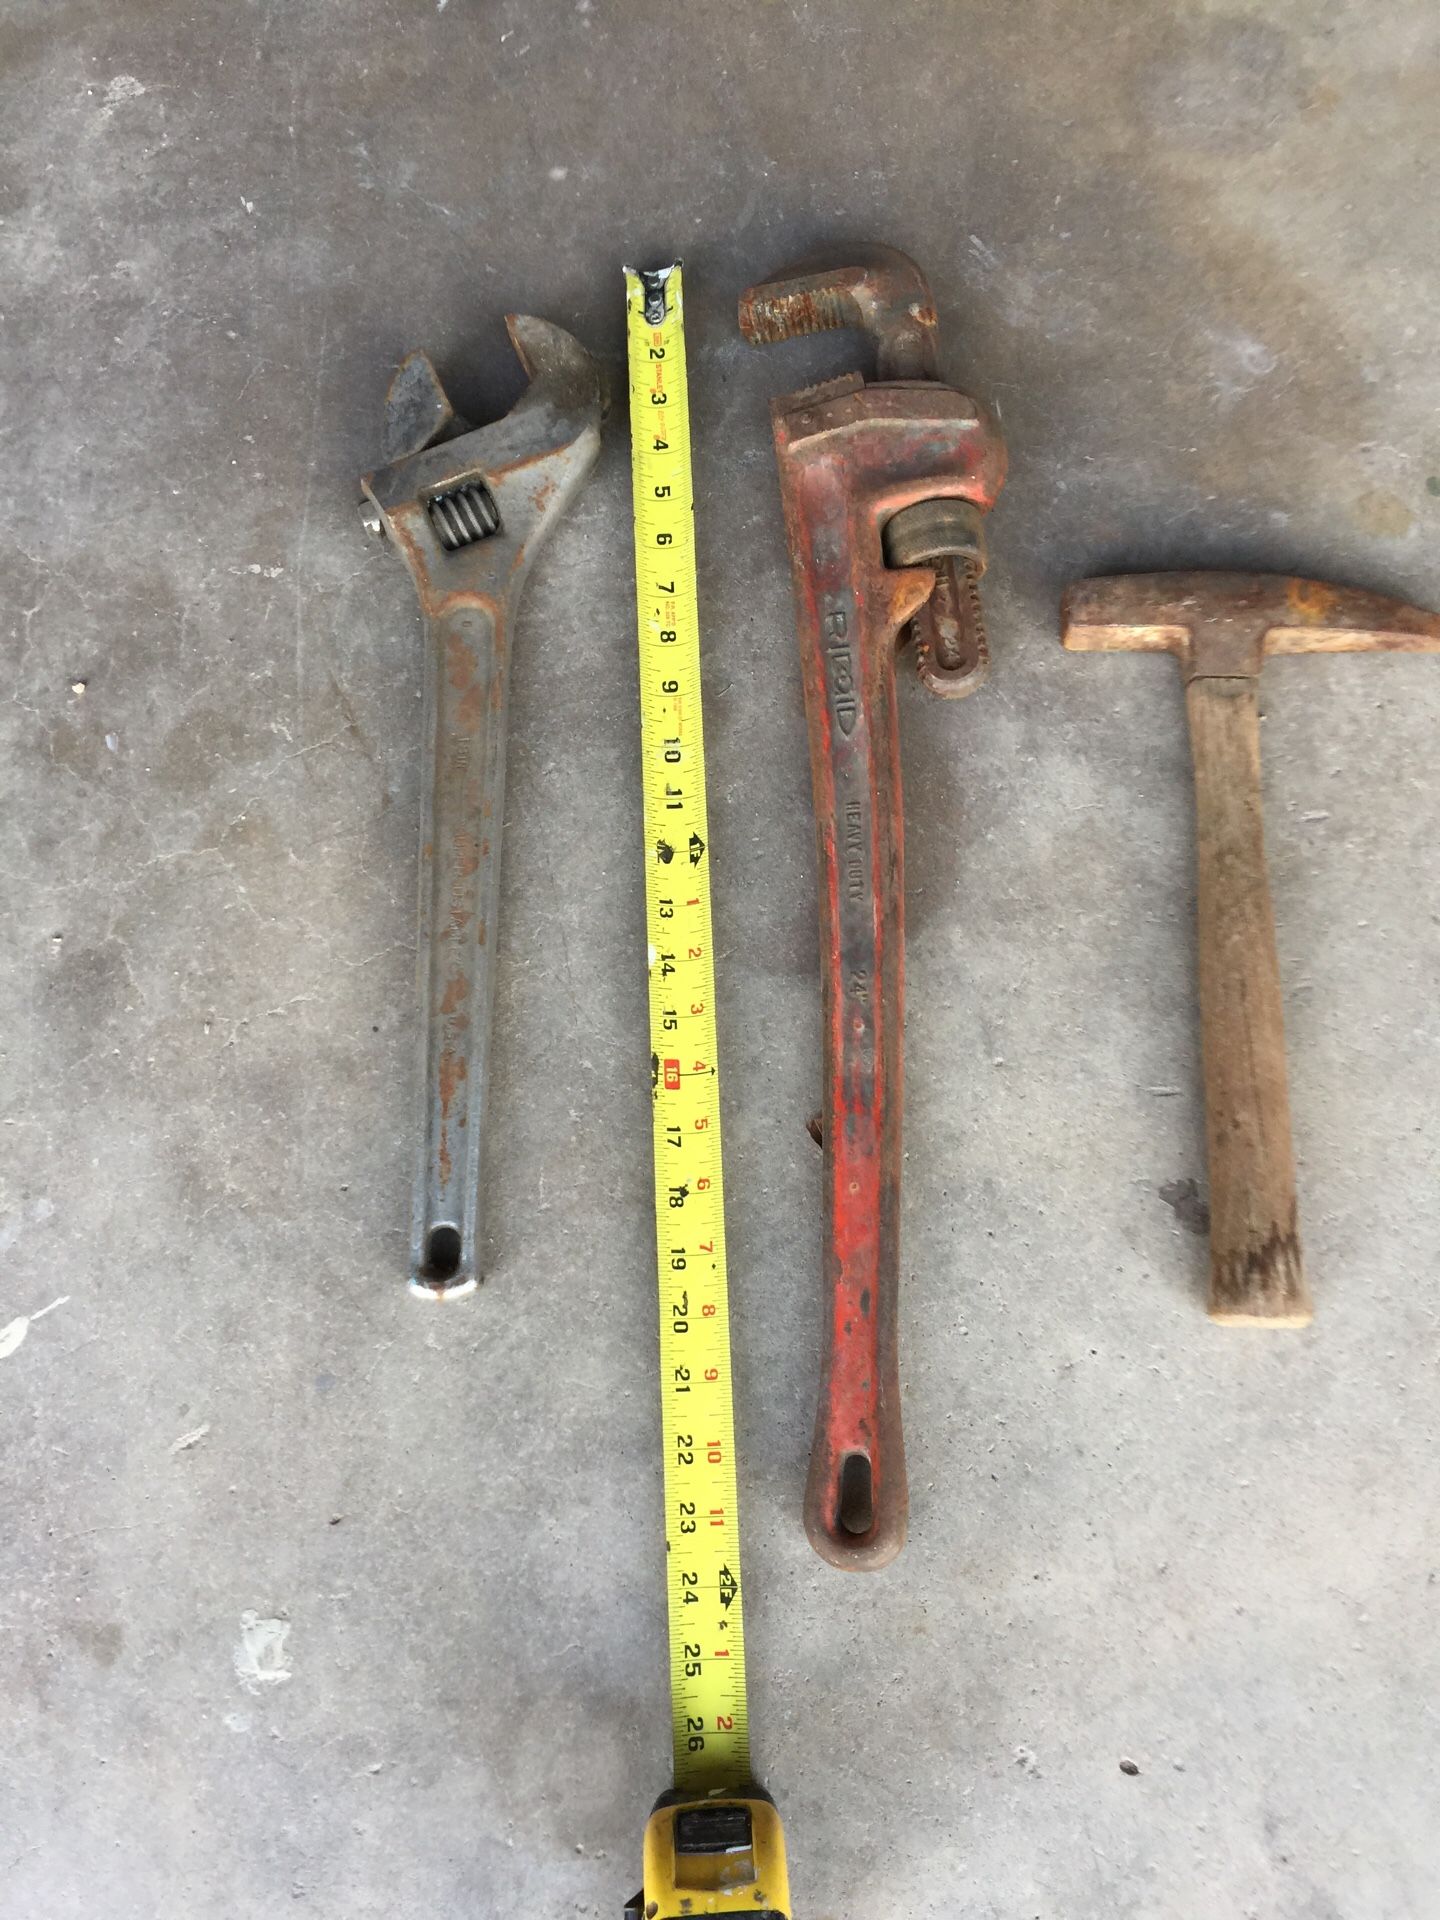 Crescent wrench Pipe wrench hammer